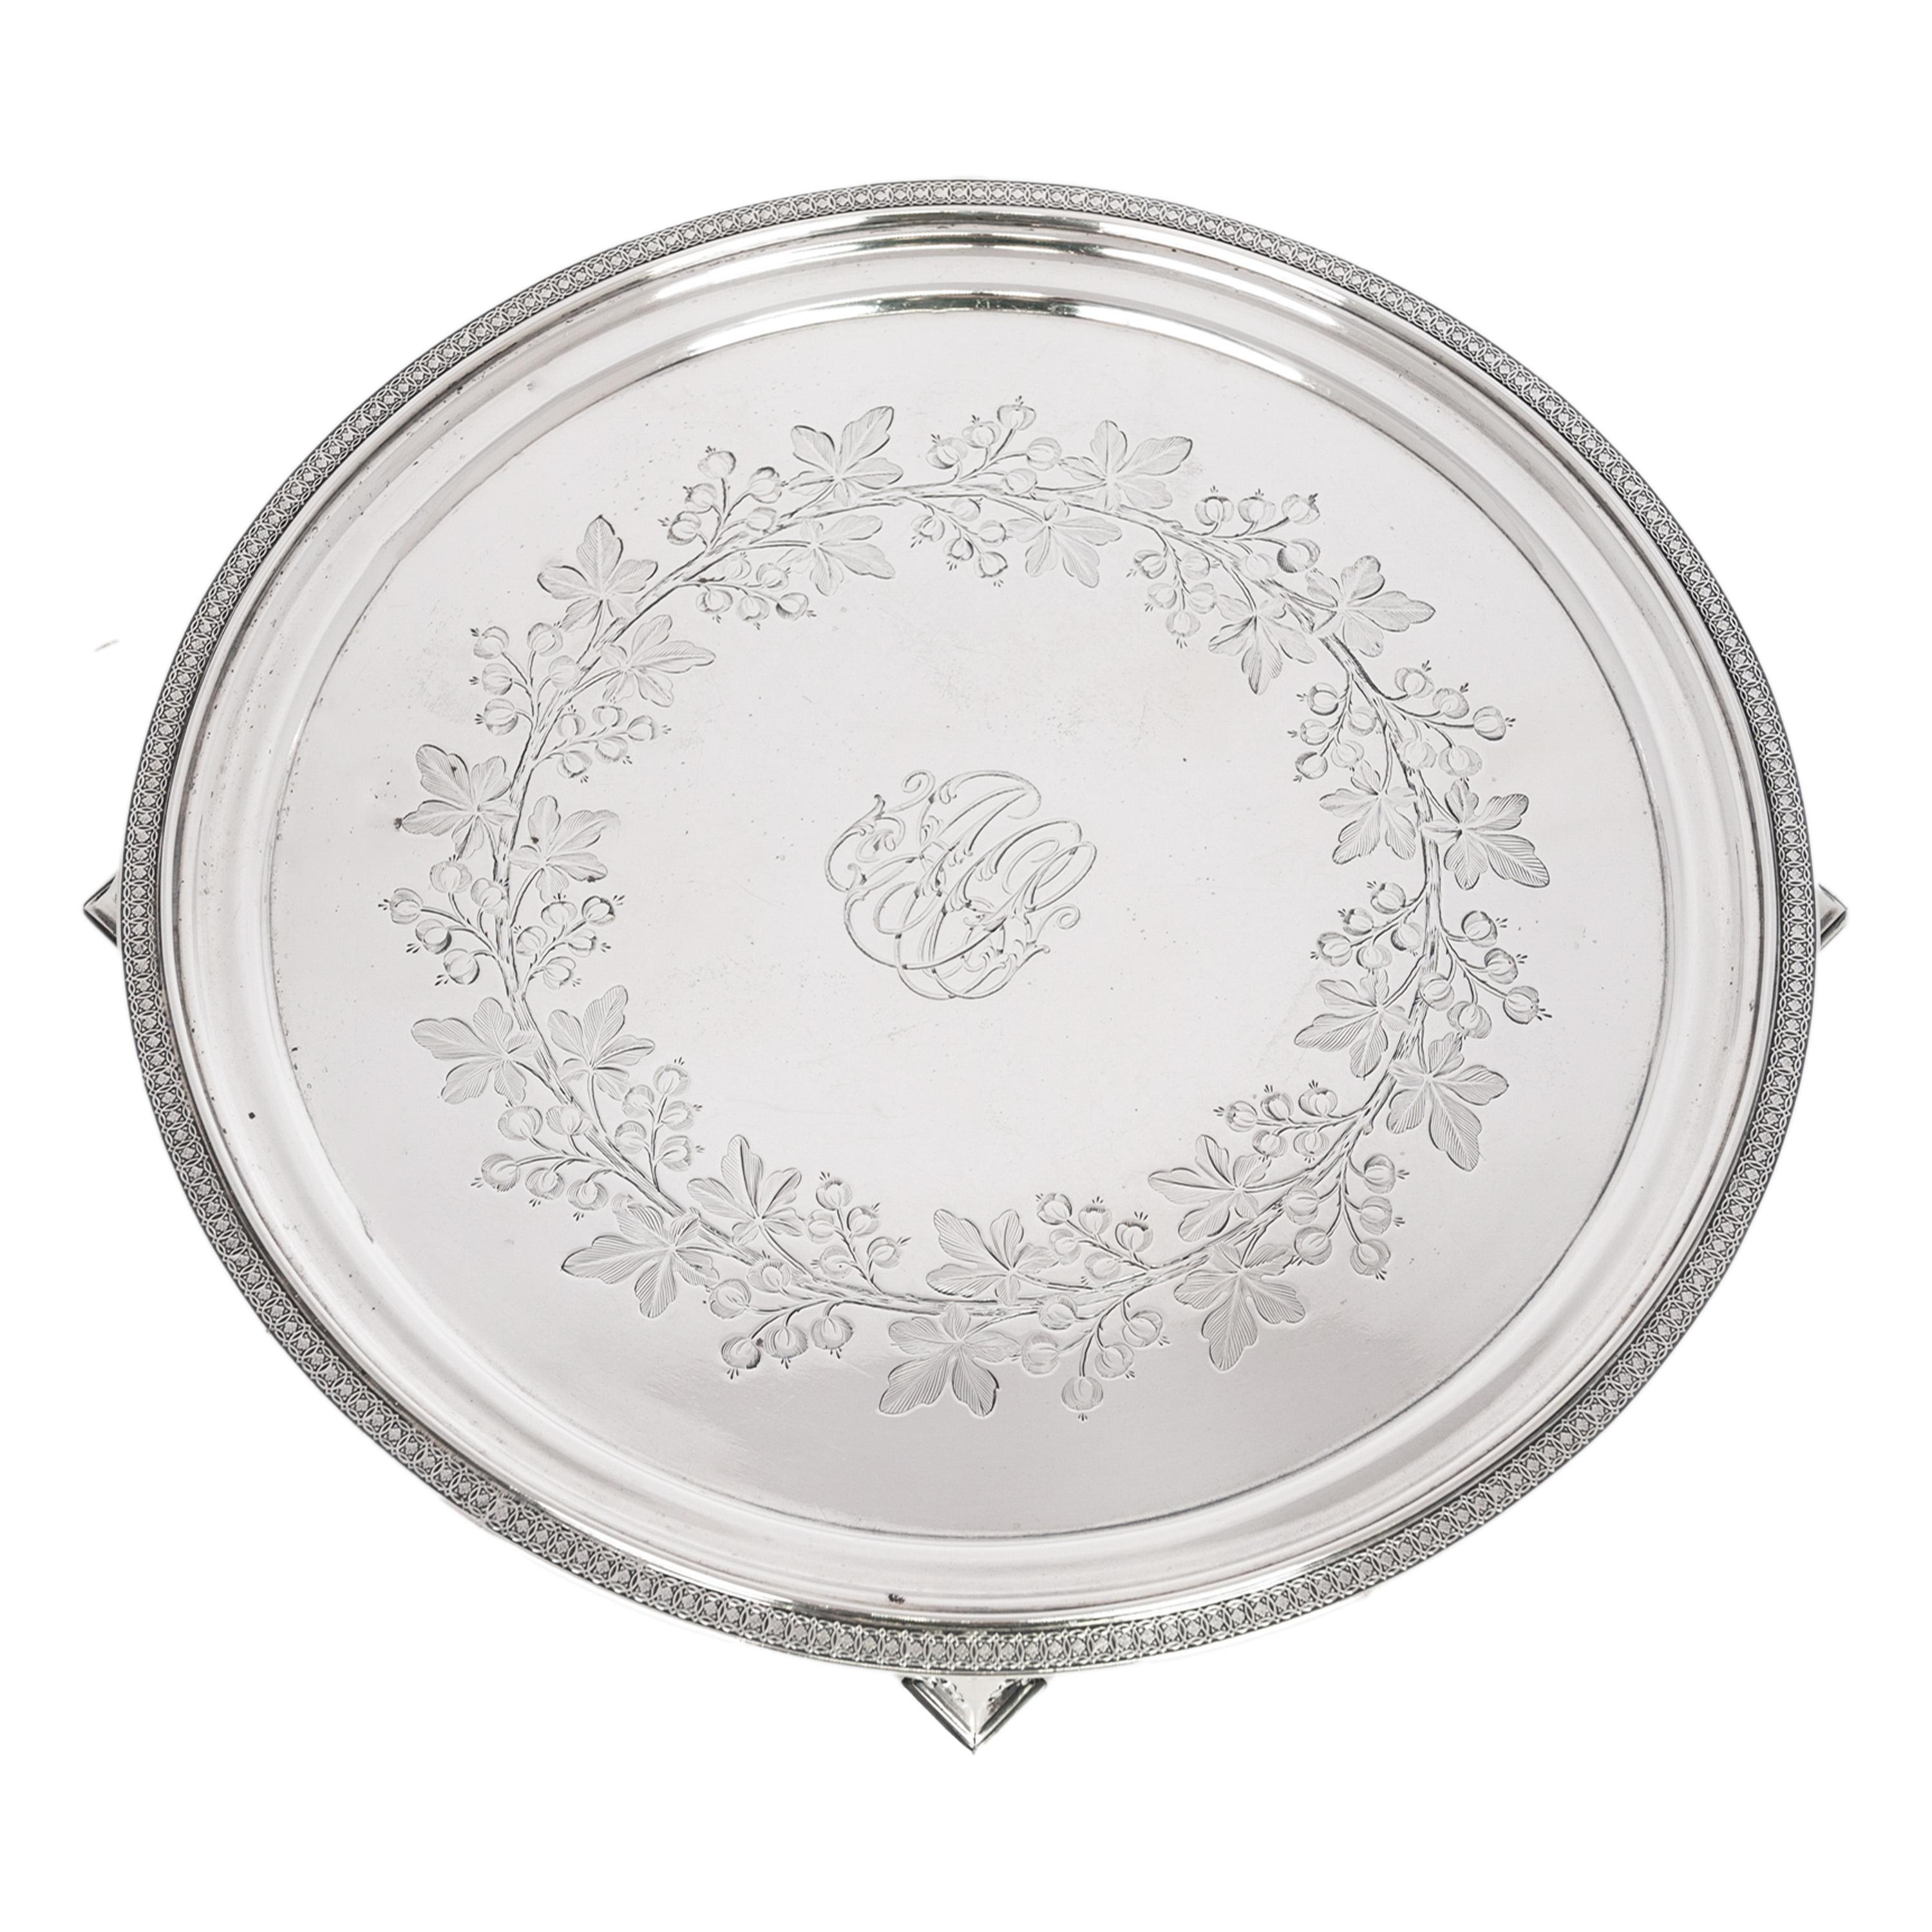 Américain Antique Sterling Silver Graved Tiffany & Co Footed Salver Tray New York 1870 en vente